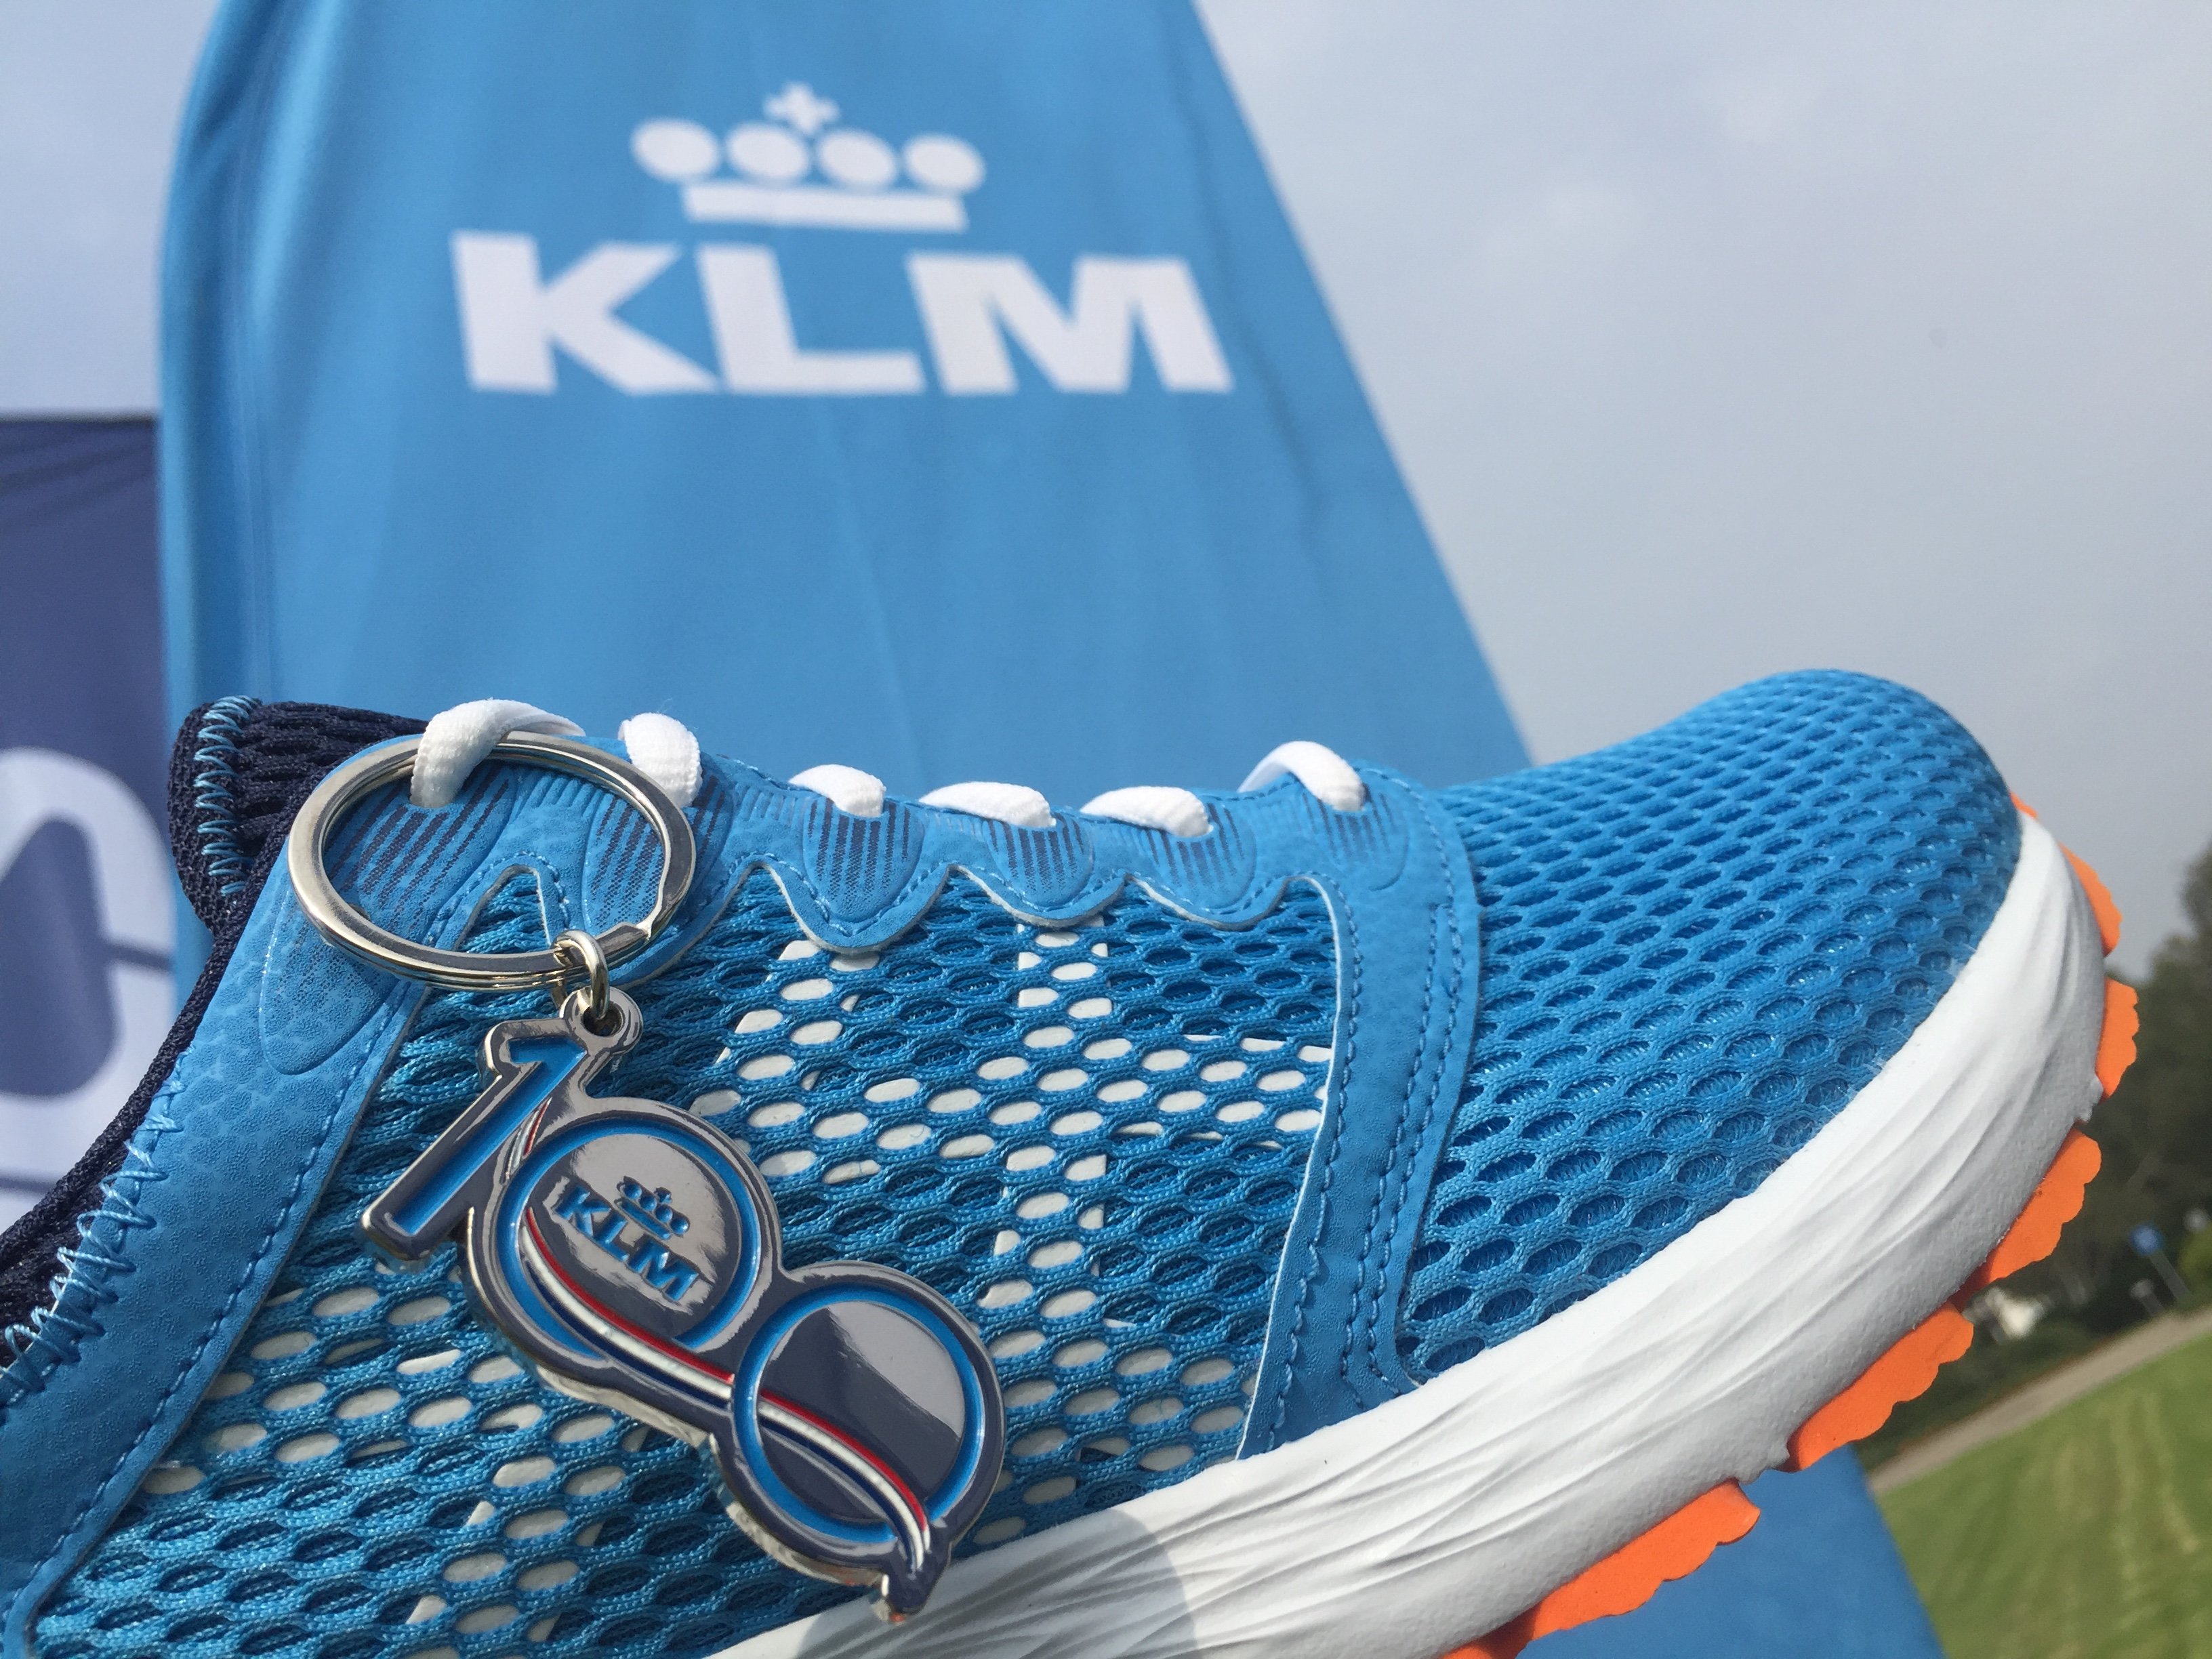 Andreas Spaeth on Twitter: "Now @KLM pulls all the stops for #KLM100 issuing sneakers (limited to 7,000 á 100€) and also launches -an apparently empty?- balloon over https://t.co/obu3vW8NhP" /